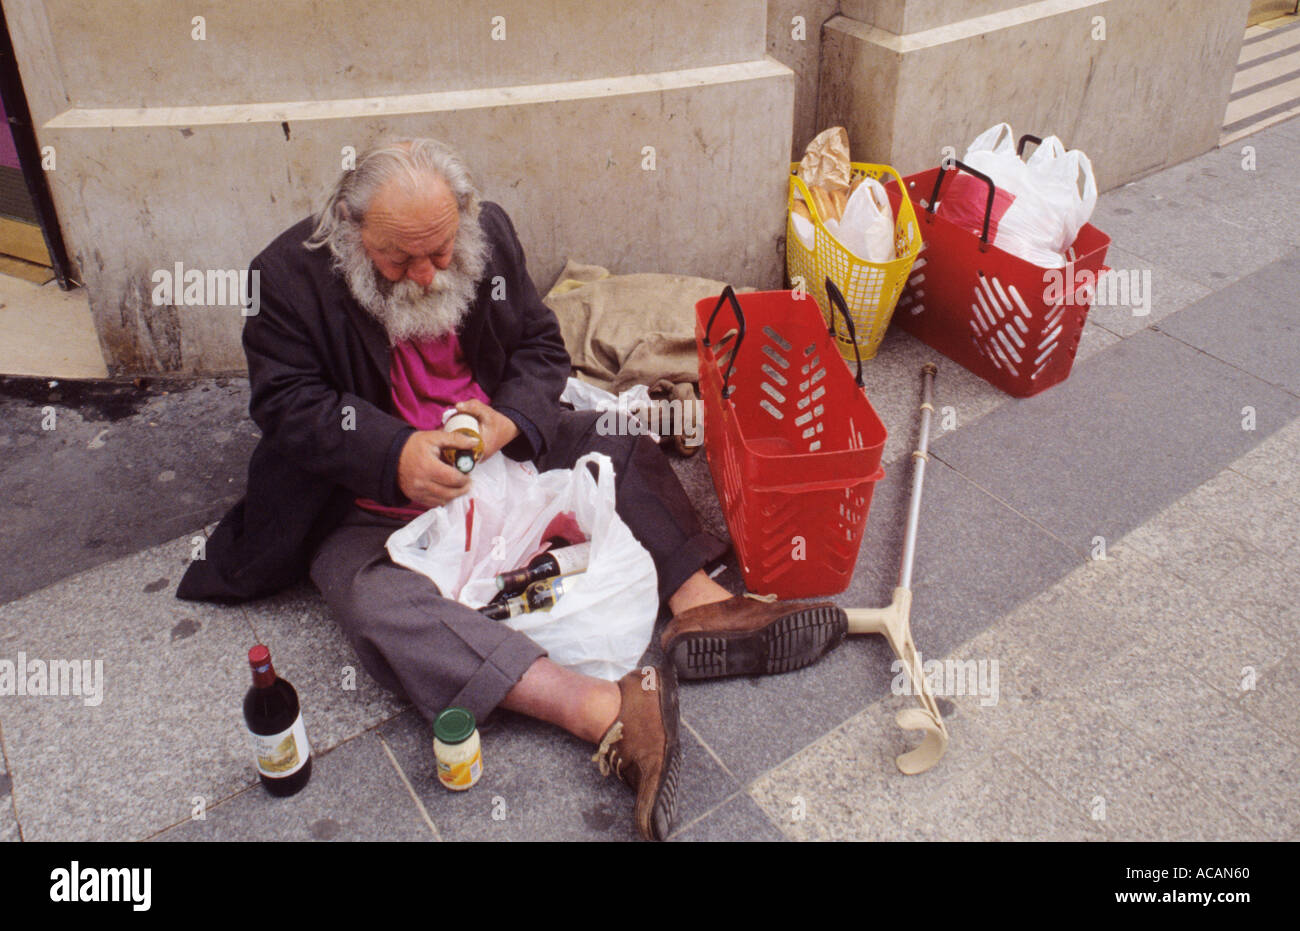 Alcoholic homeless disabled elderly man sitting on city street pavement with wine bottles Stock Photo